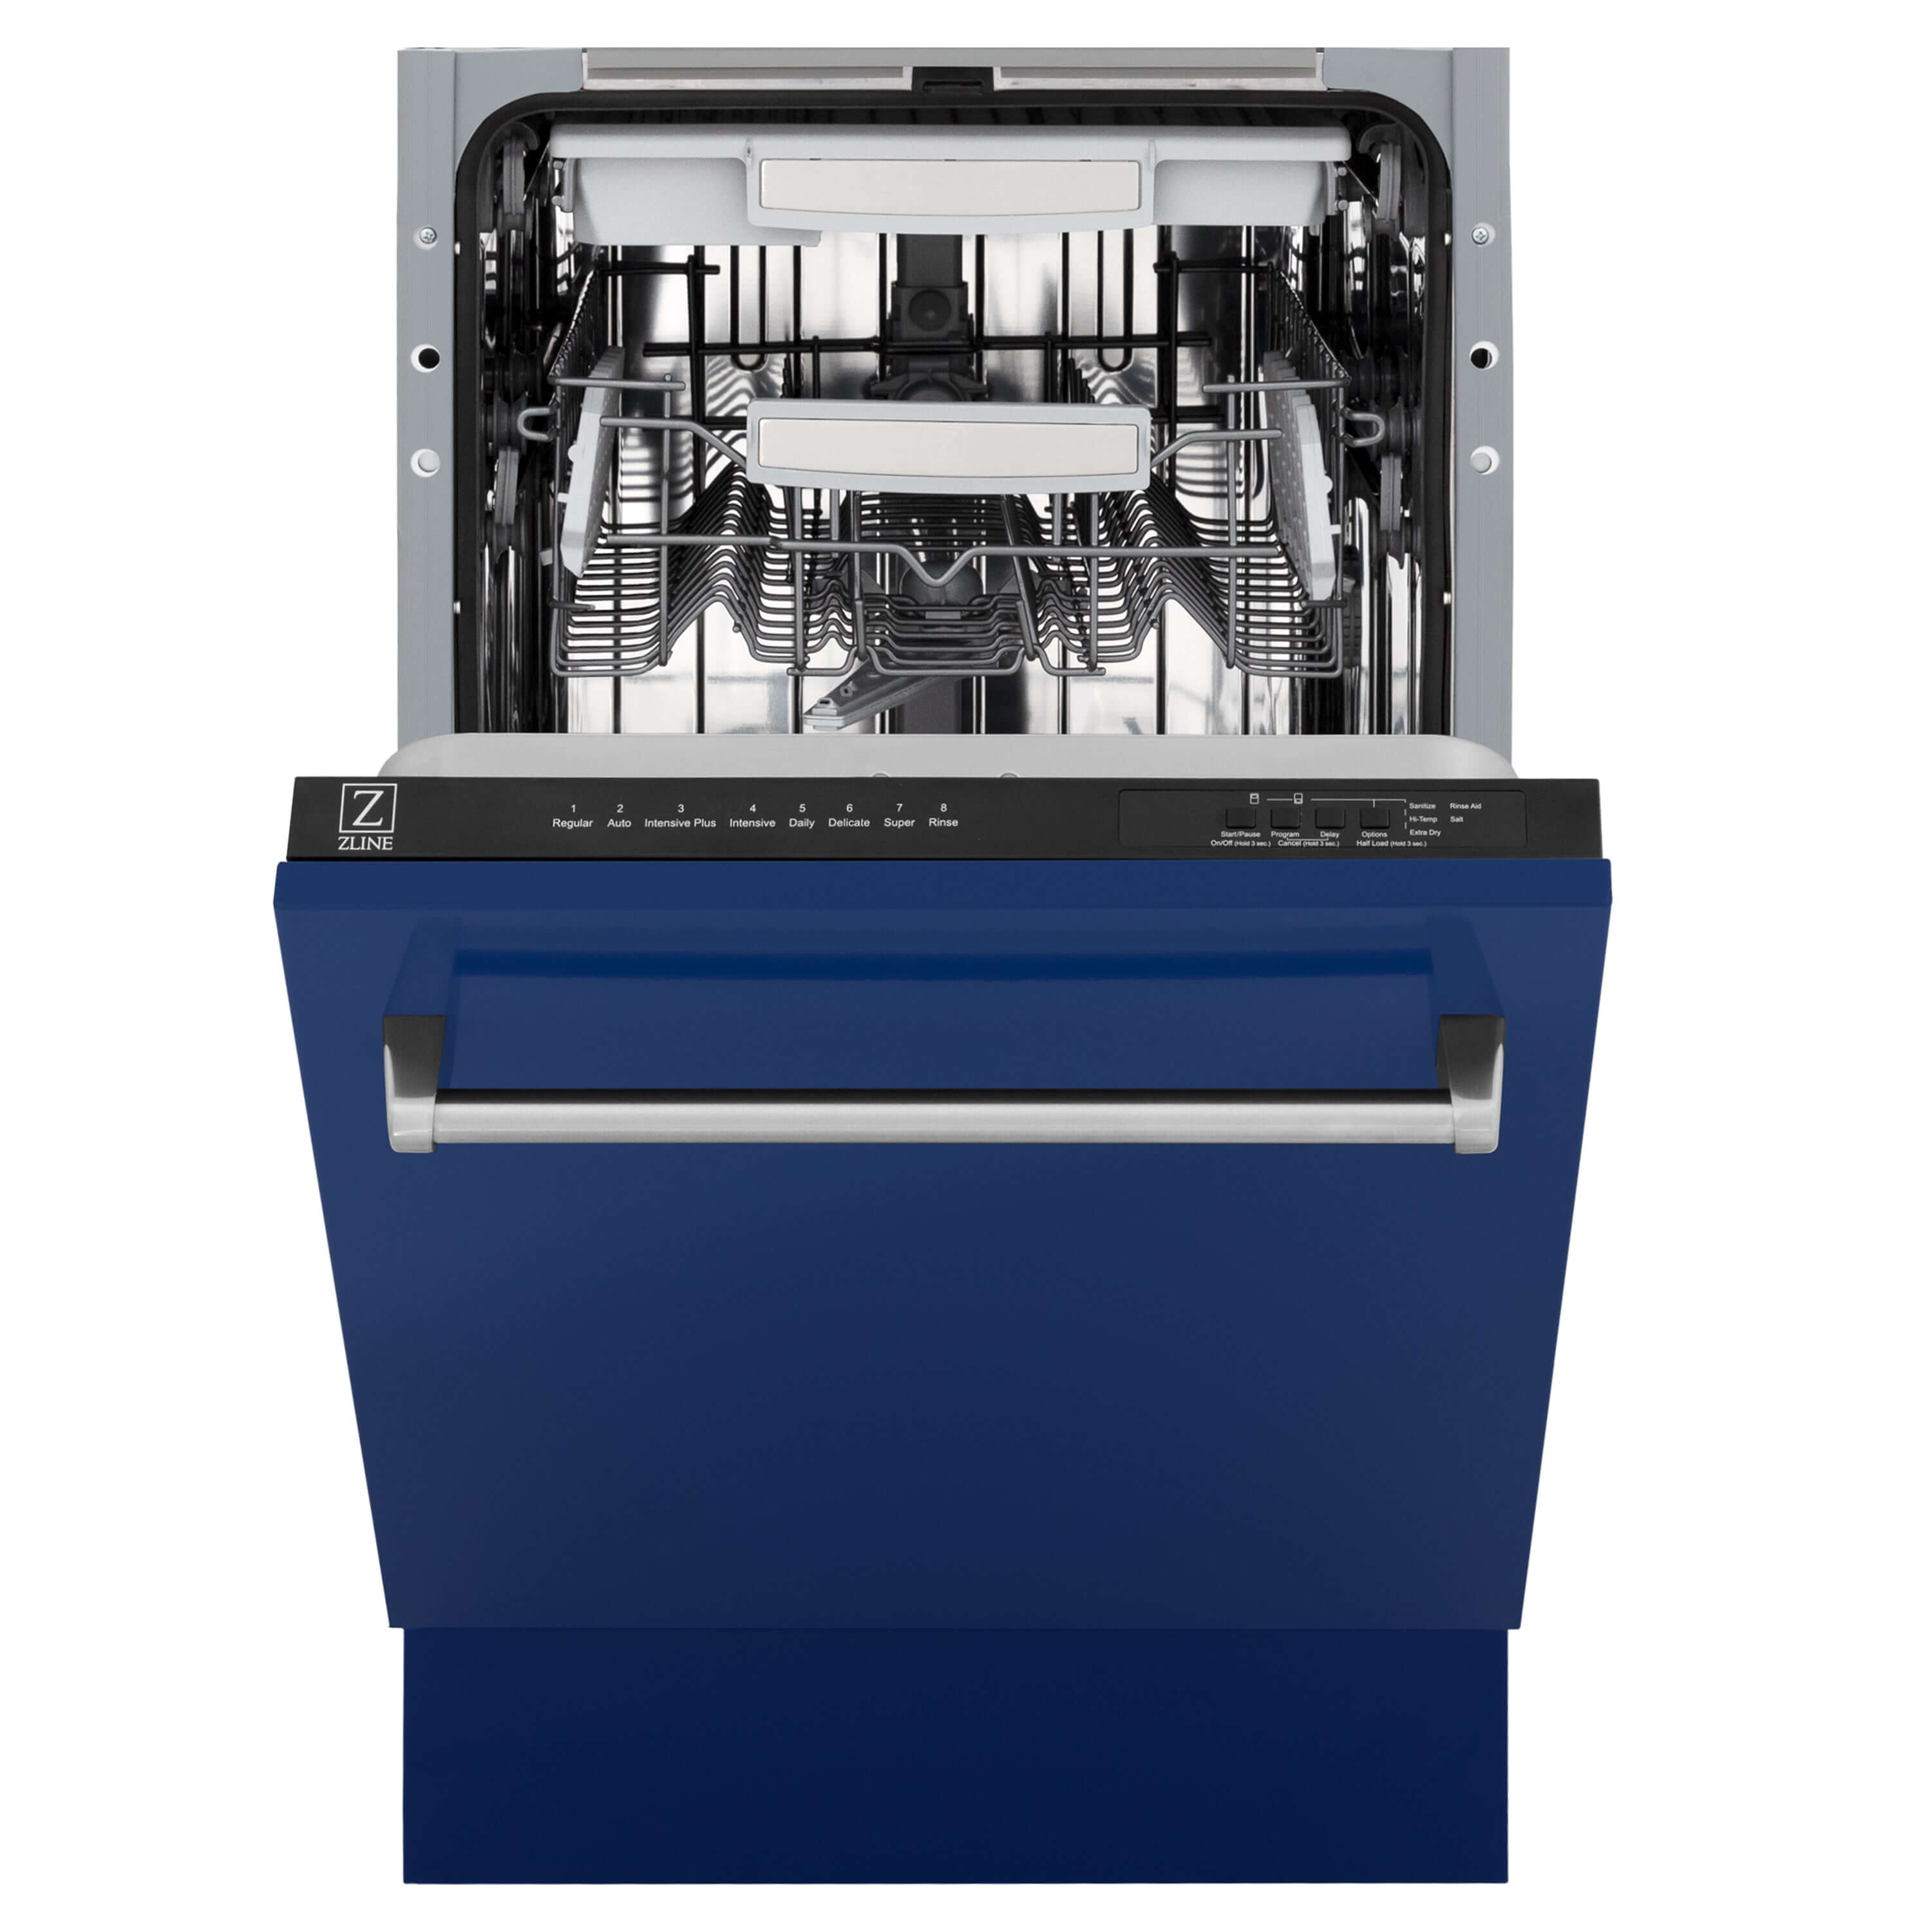 ZLINE 18 in. Tallac Series 3rd Rack Top Control Built-In Dishwasher in Blue Gloss with Stainless Steel Tub, 51dBa (DWV-BG-18) front, half open.